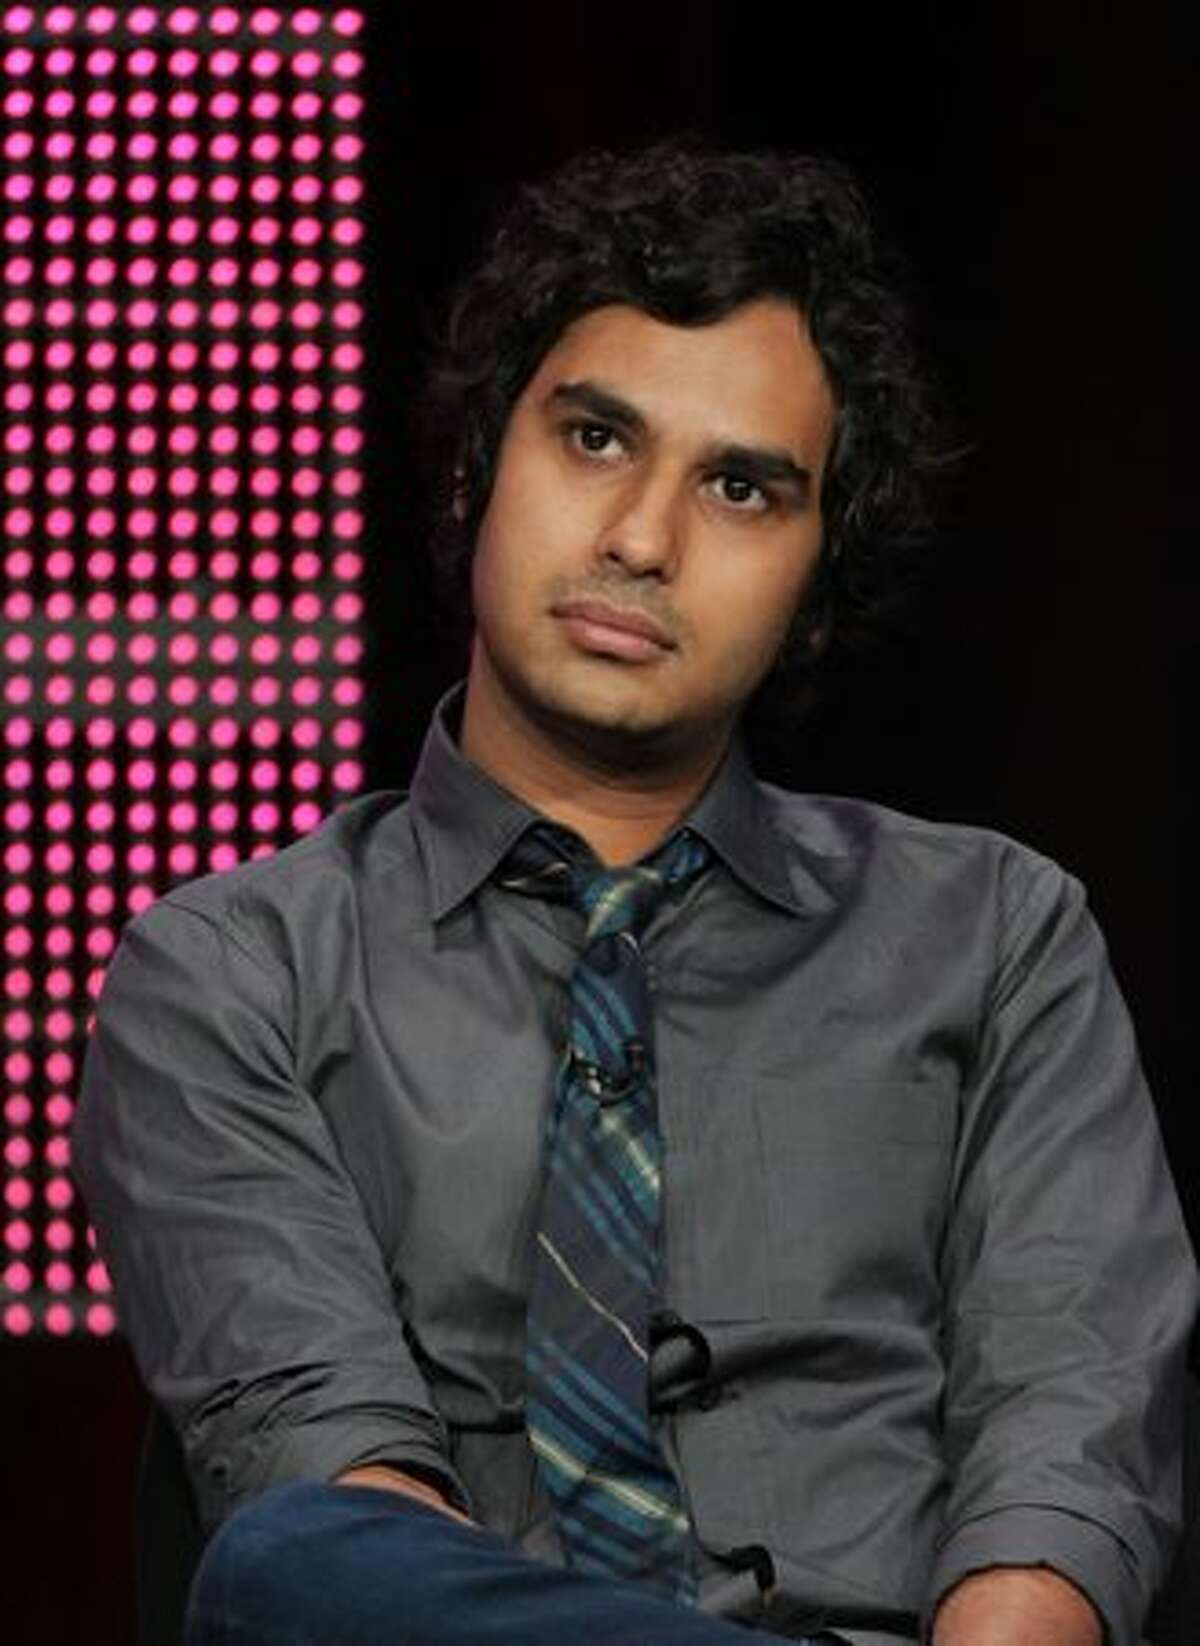 Actor Kunal Nayyar speaks at "The Big Bang Theory" panel during 2010 Summer TCA Tour Day 1 at the Beverly Hilton Hotel in Beverly Hills, California.